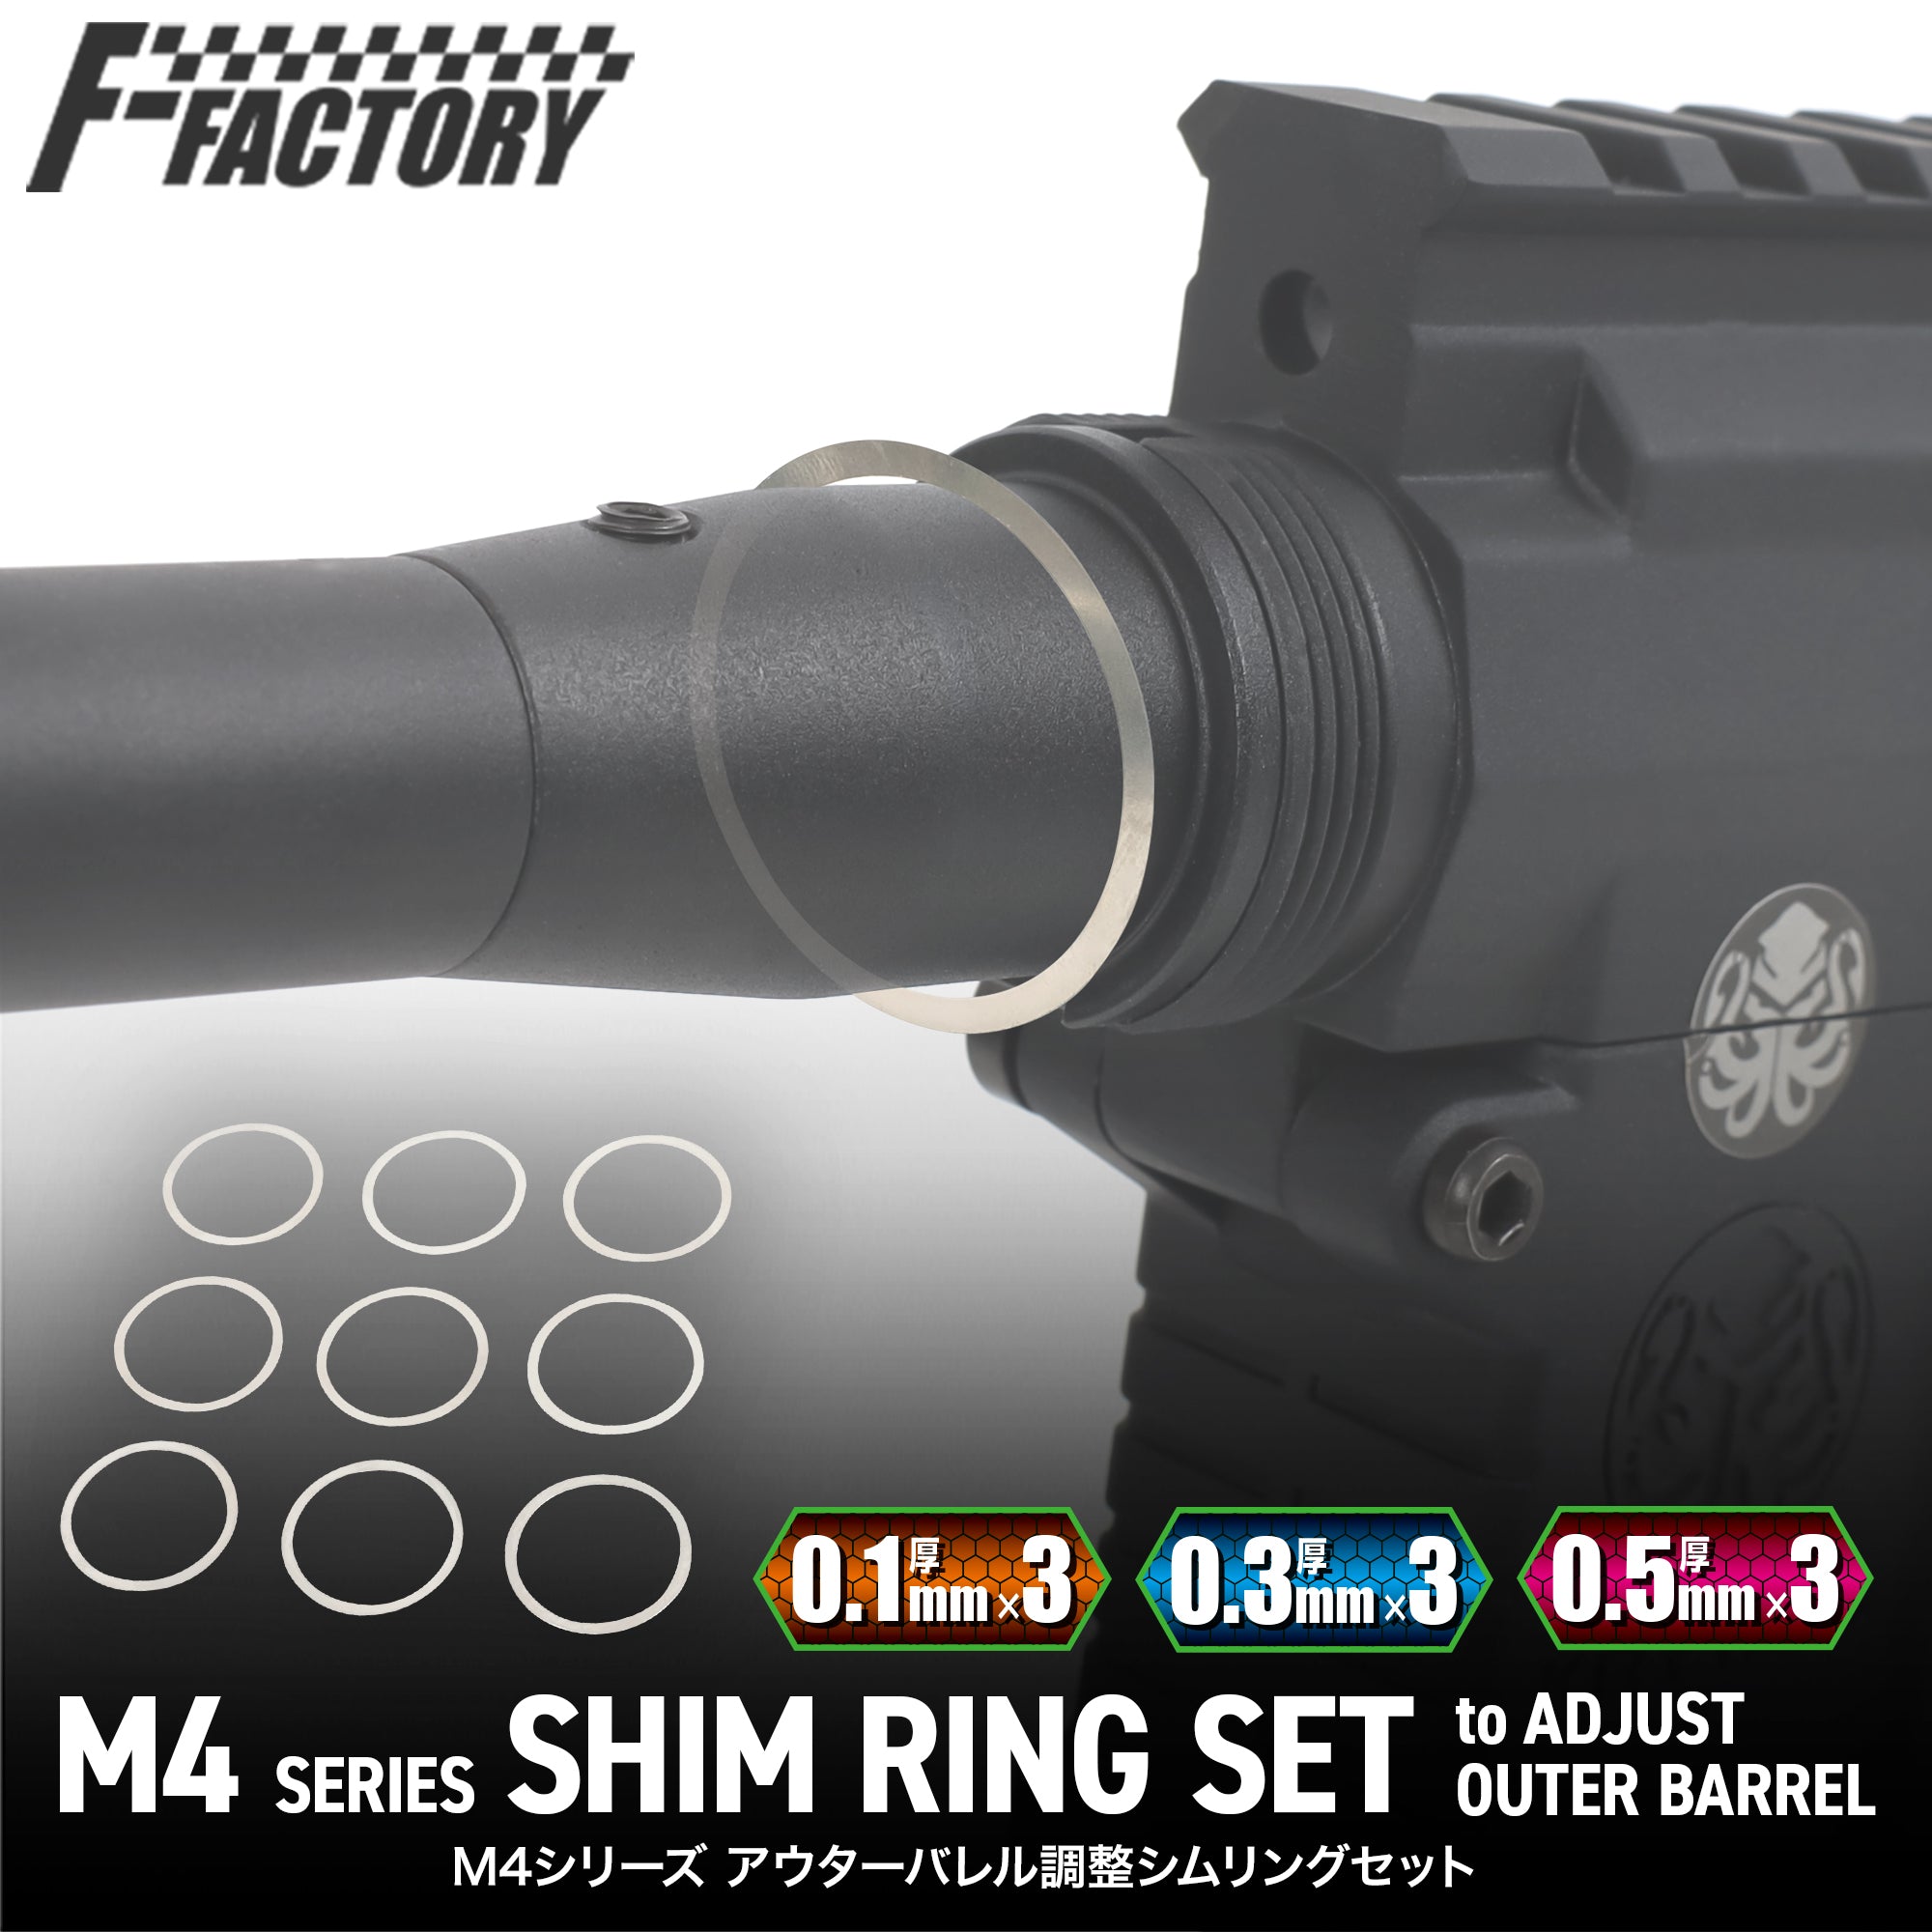 M4 SERIES OUTER BARREL ADJUSTMENT SHIM RING SET [FirstFactory]]